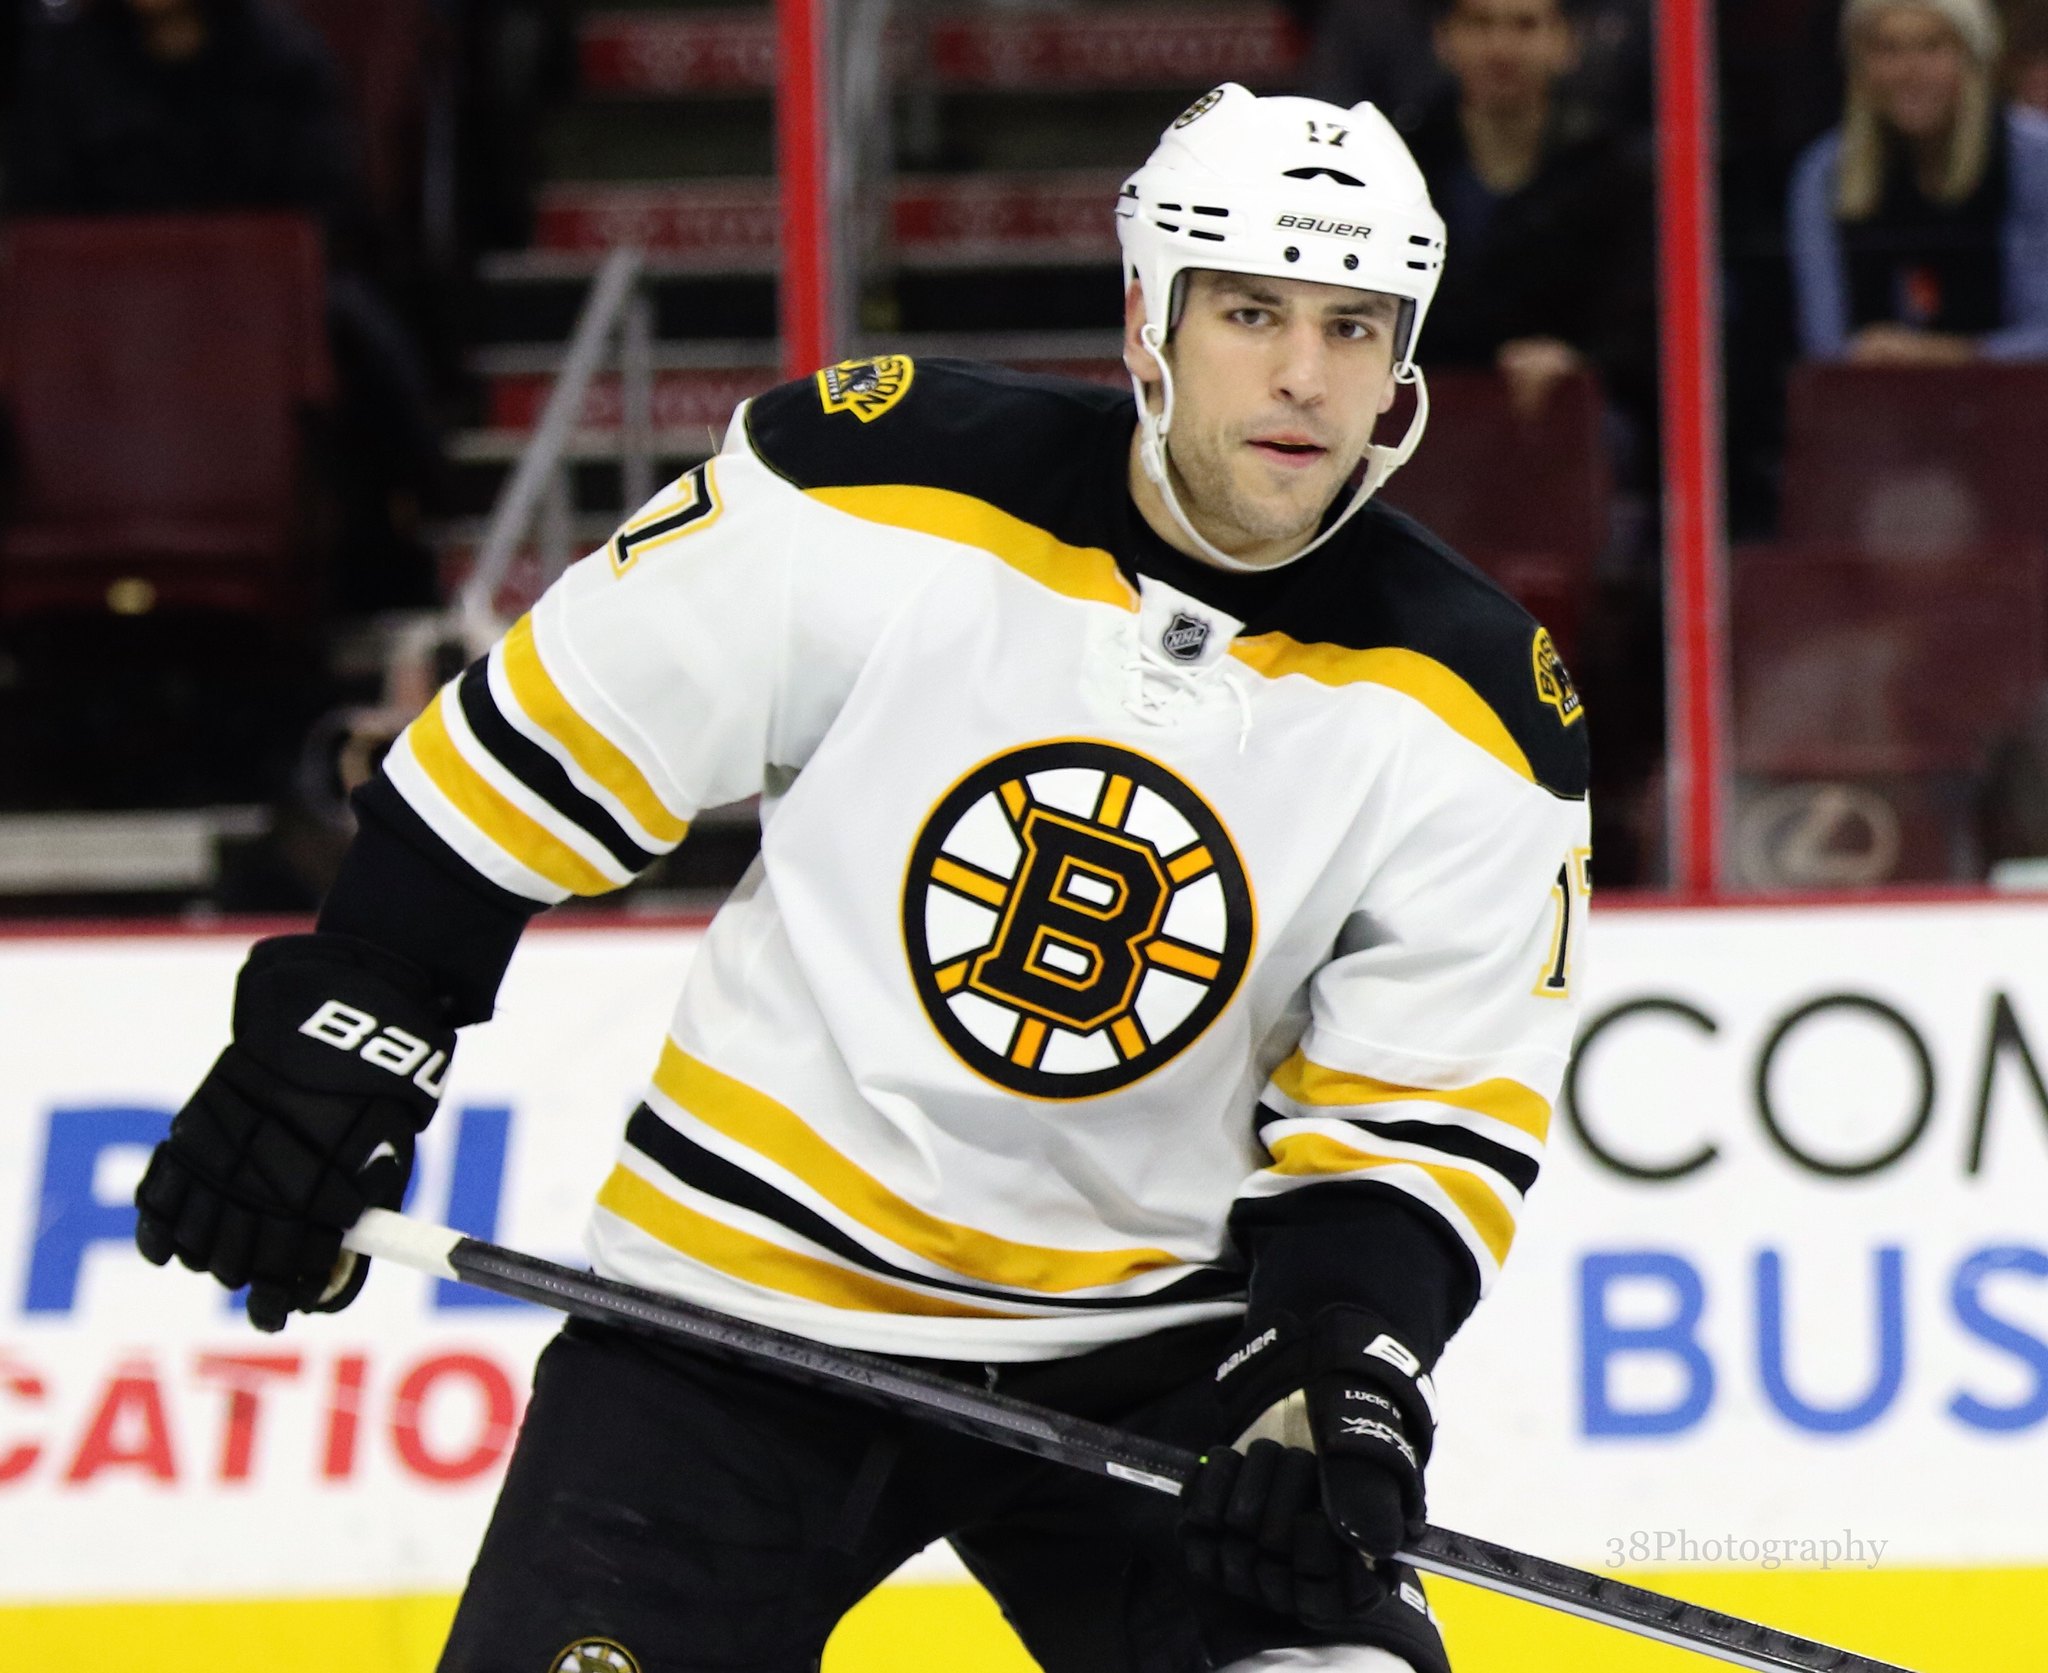 MILAN LUCIC: HE'S BACK